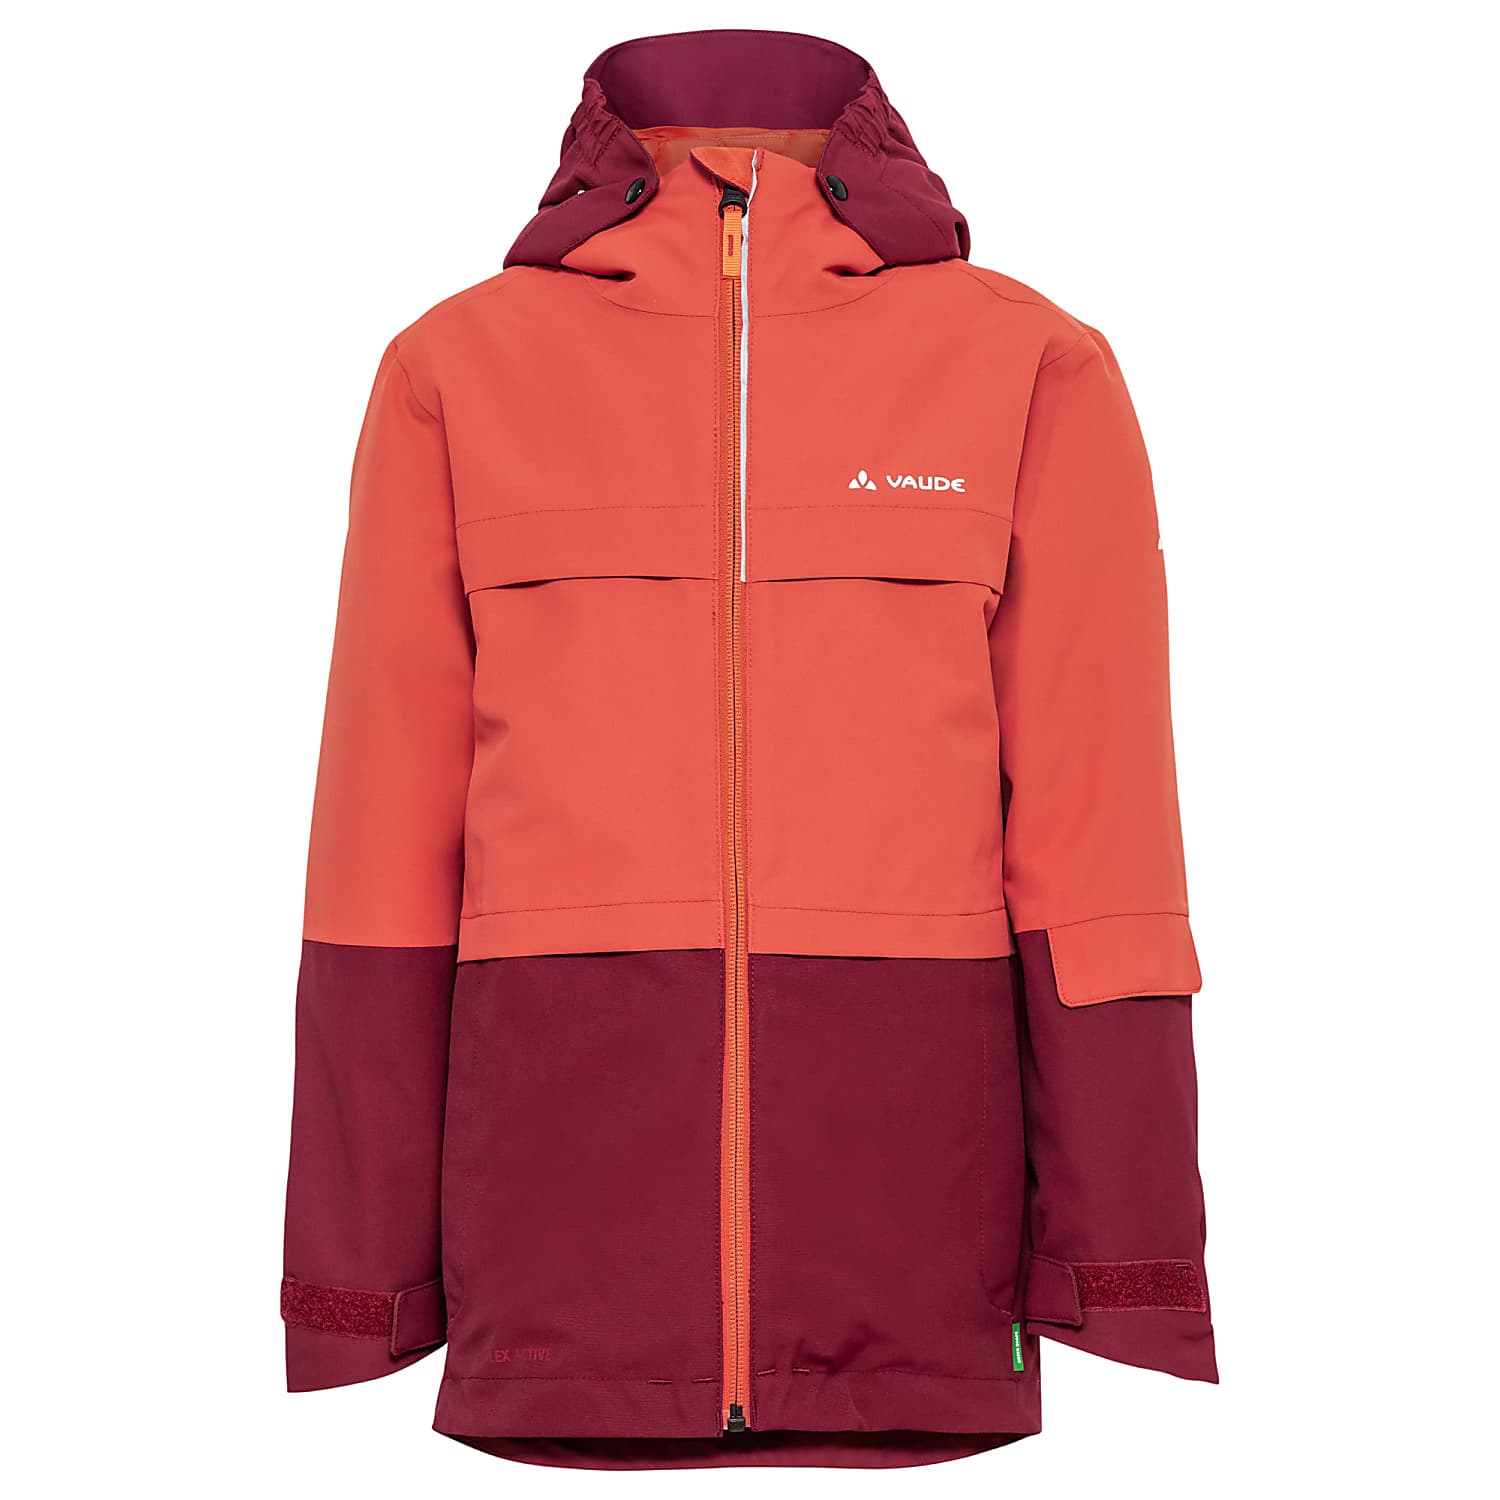 3IN1 Chili - Shipping 60£ starts Free Hot KIDS CUP SNOW JACKET at Vaude II,